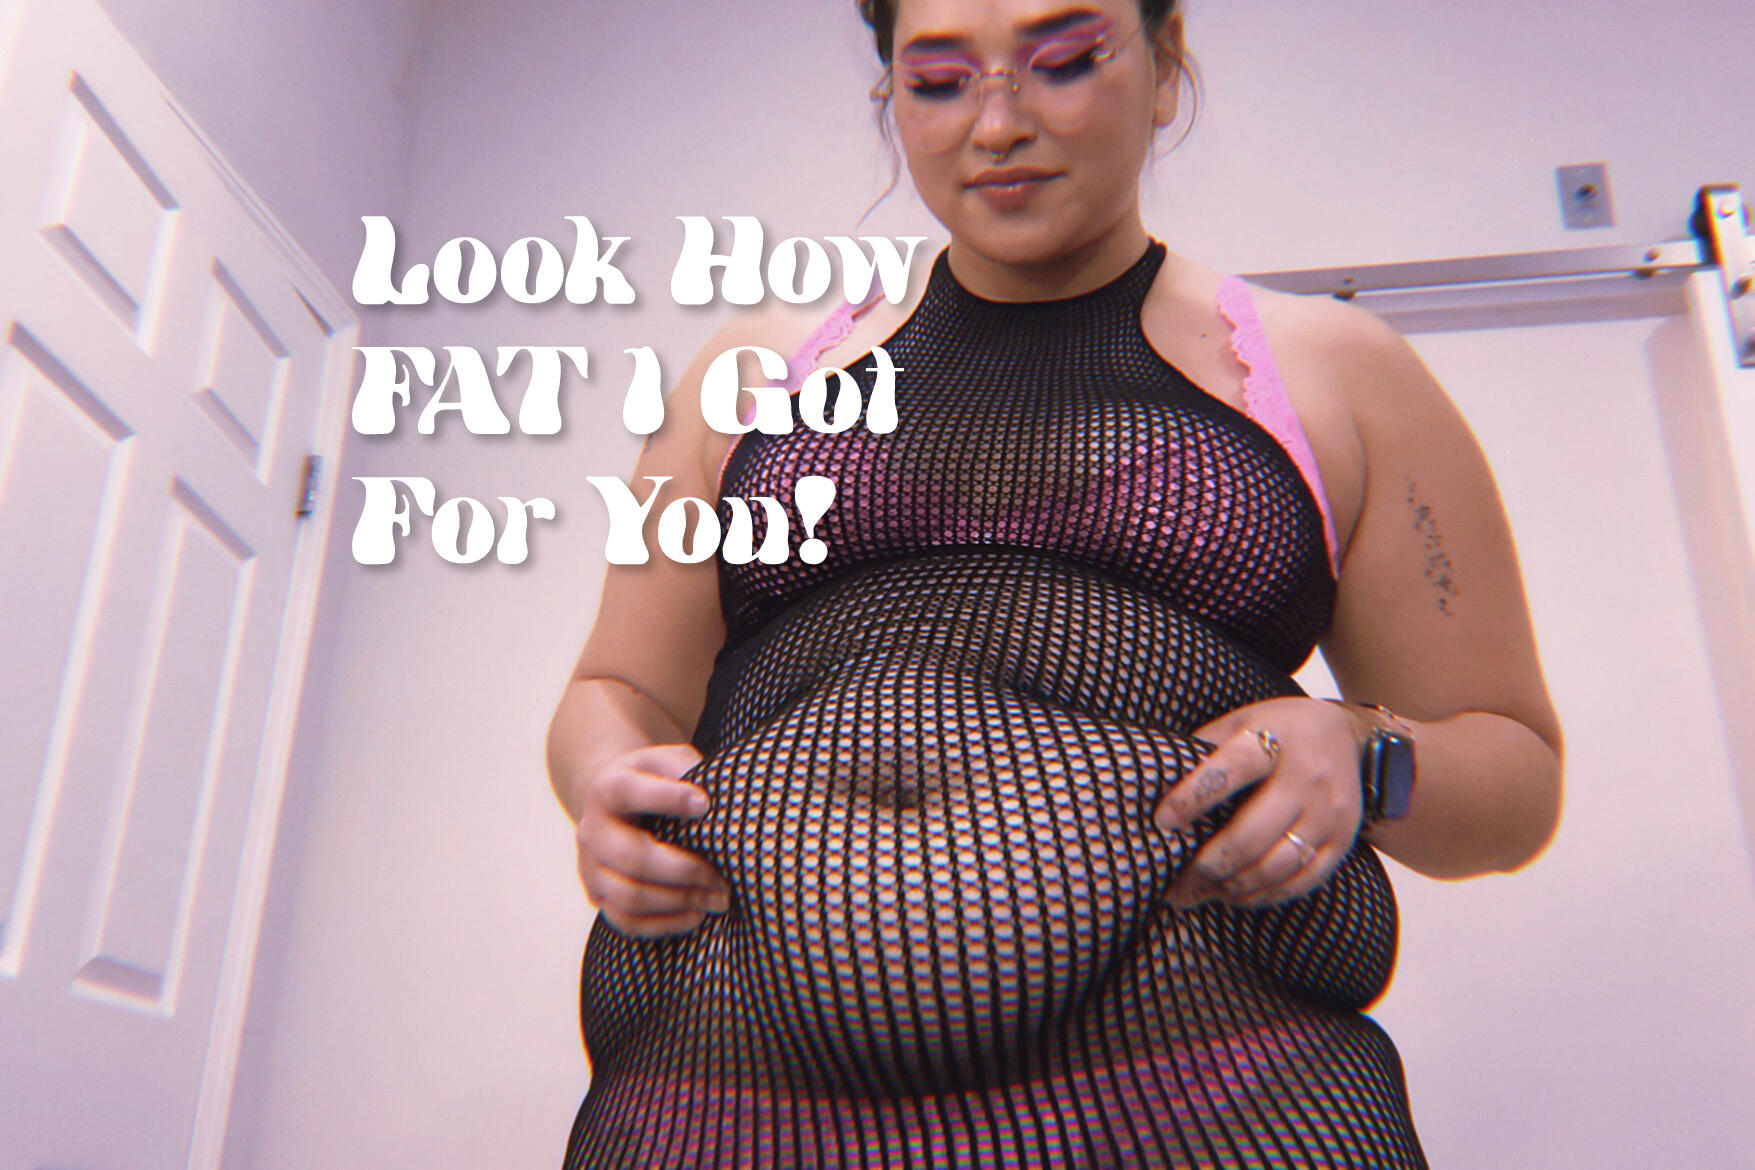 I Made Myself So FAT For You! - Video Clips - Weight Gain - feeder/feedee image